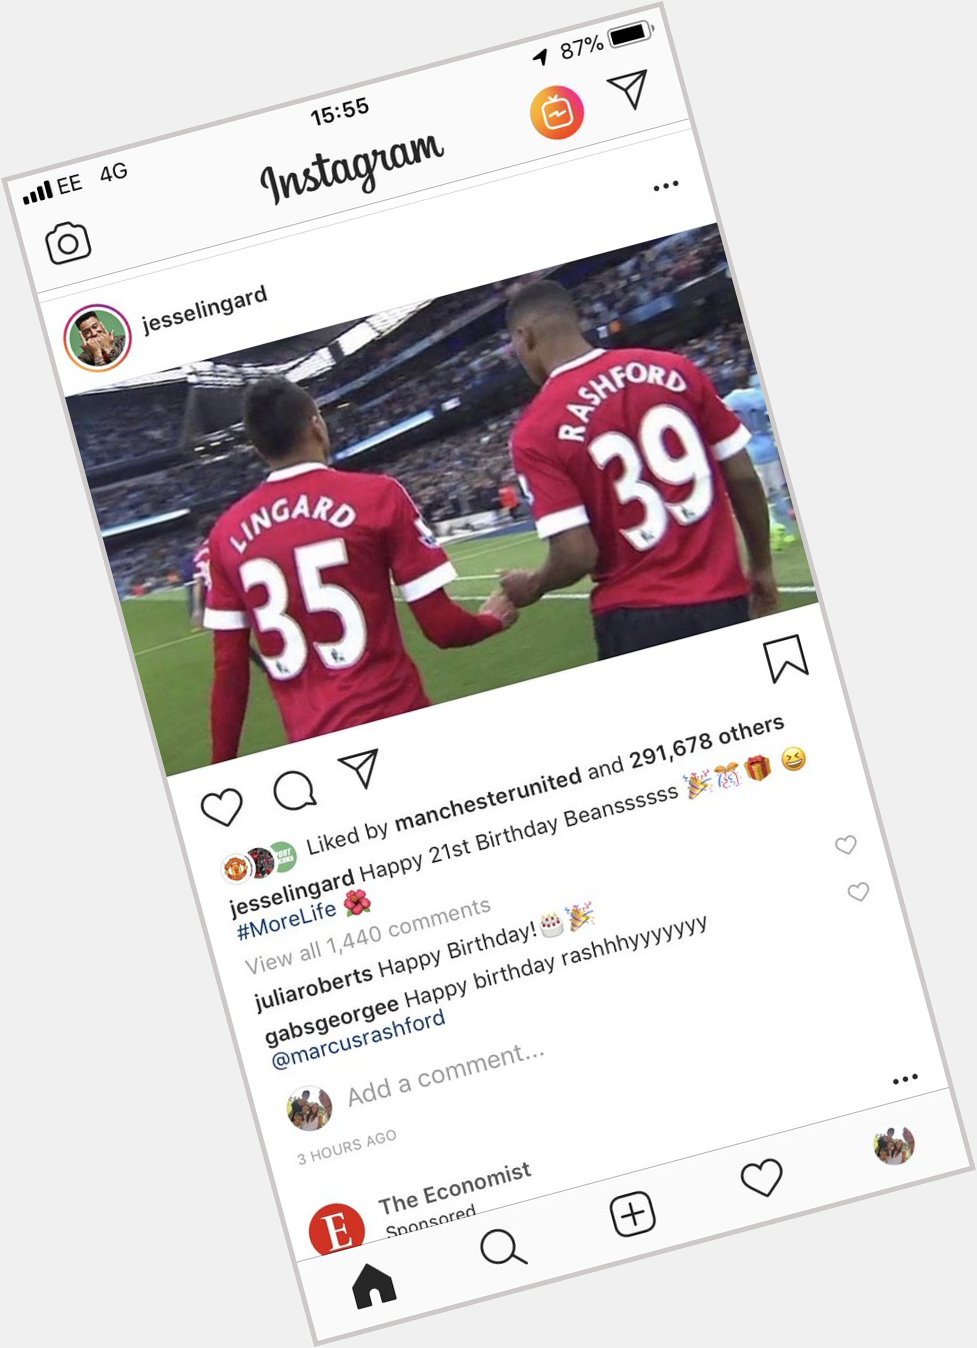 Things you don t expect to see: Julia Roberts wishing Marcus Rashford Happy Birthday on Jesse Lingard s insta page. 